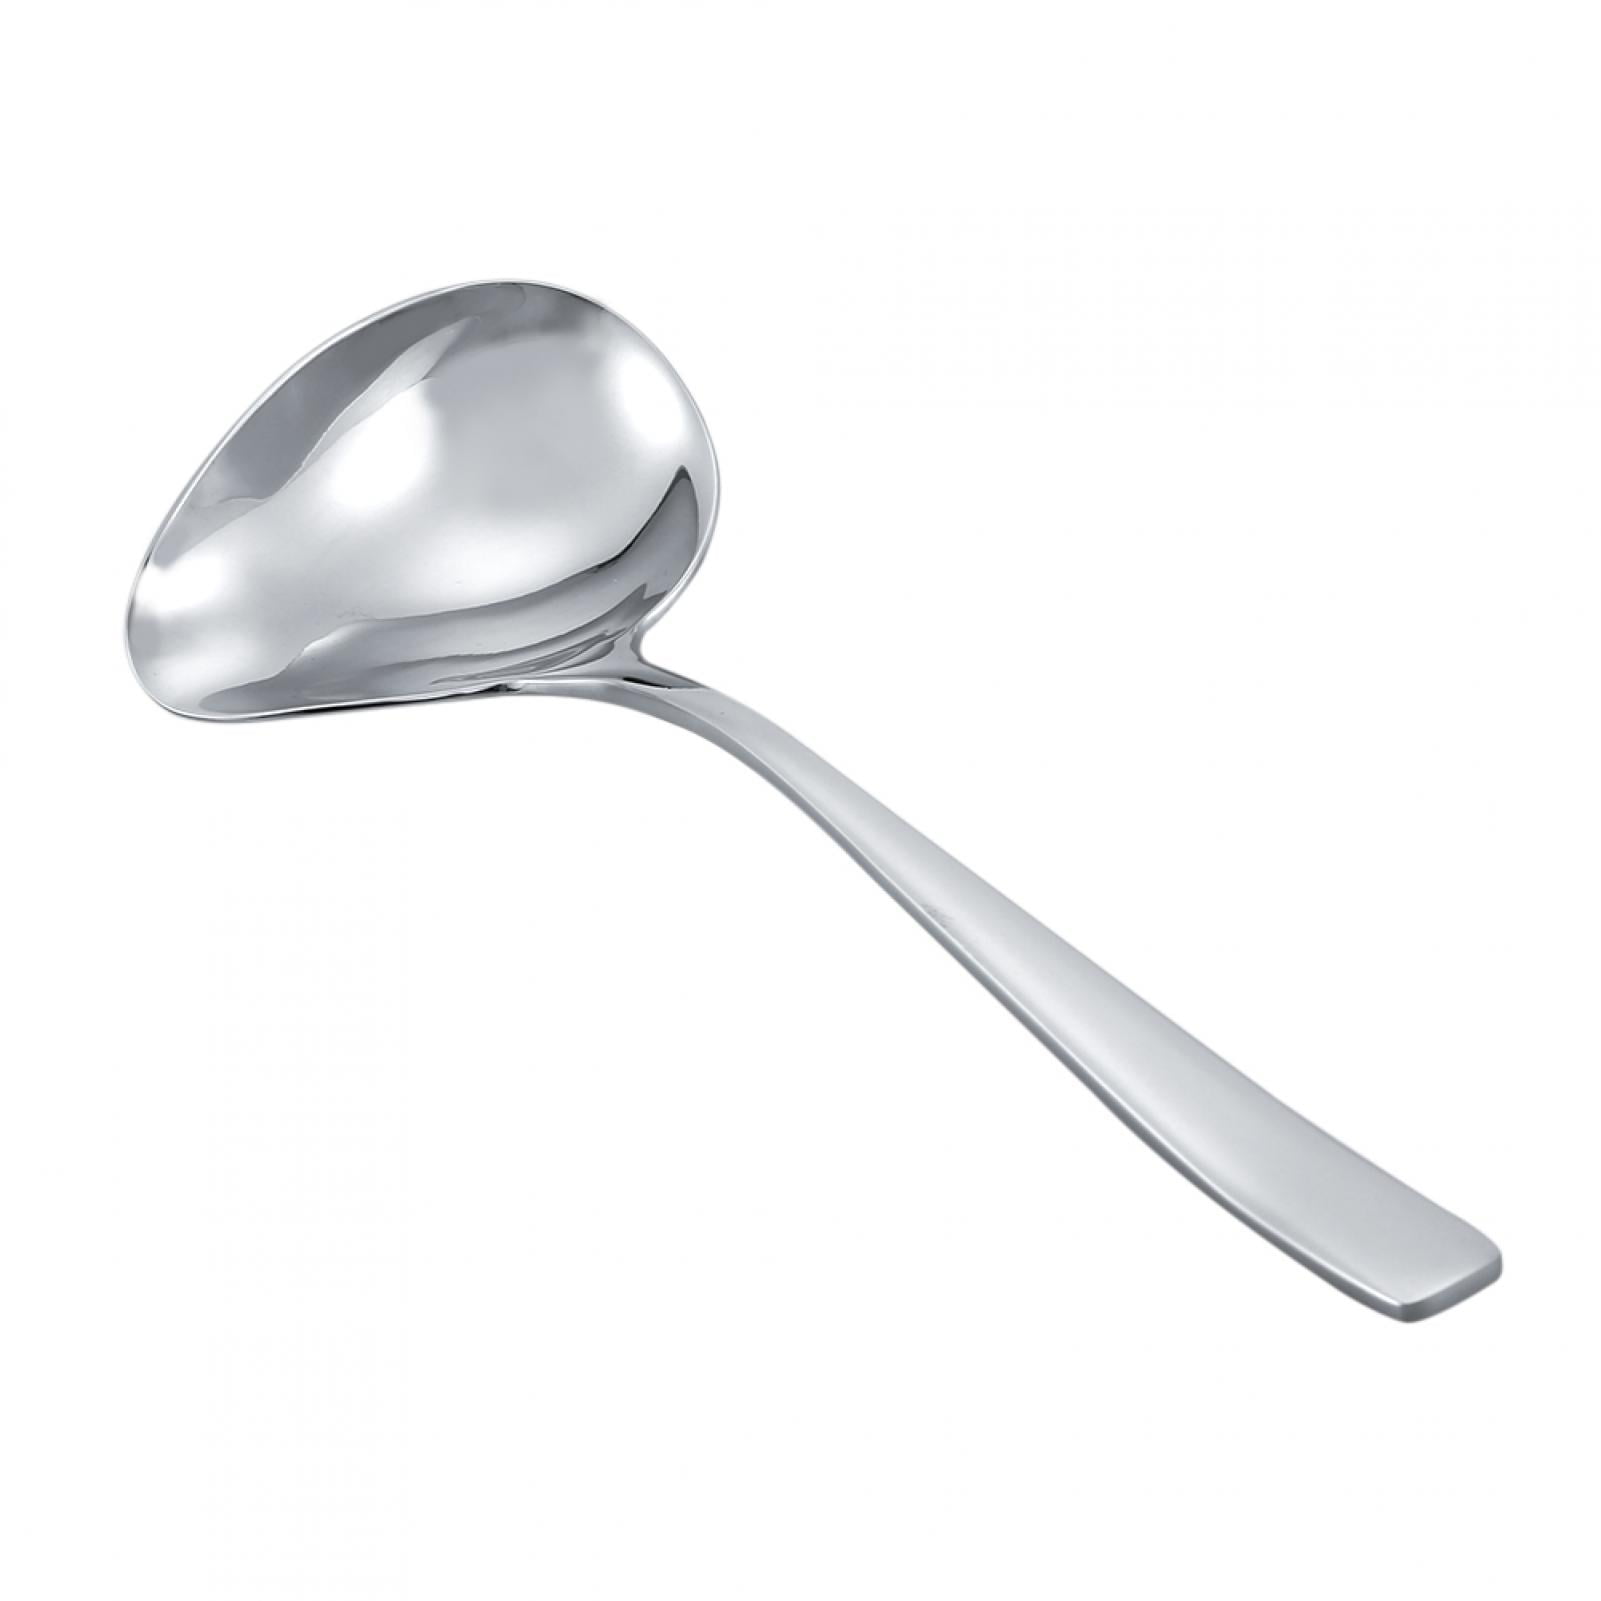 Details about   Stainless Steel Sauce Drizzle Spoon With Spout Sugar Spoon Cooking Utensil To GS 